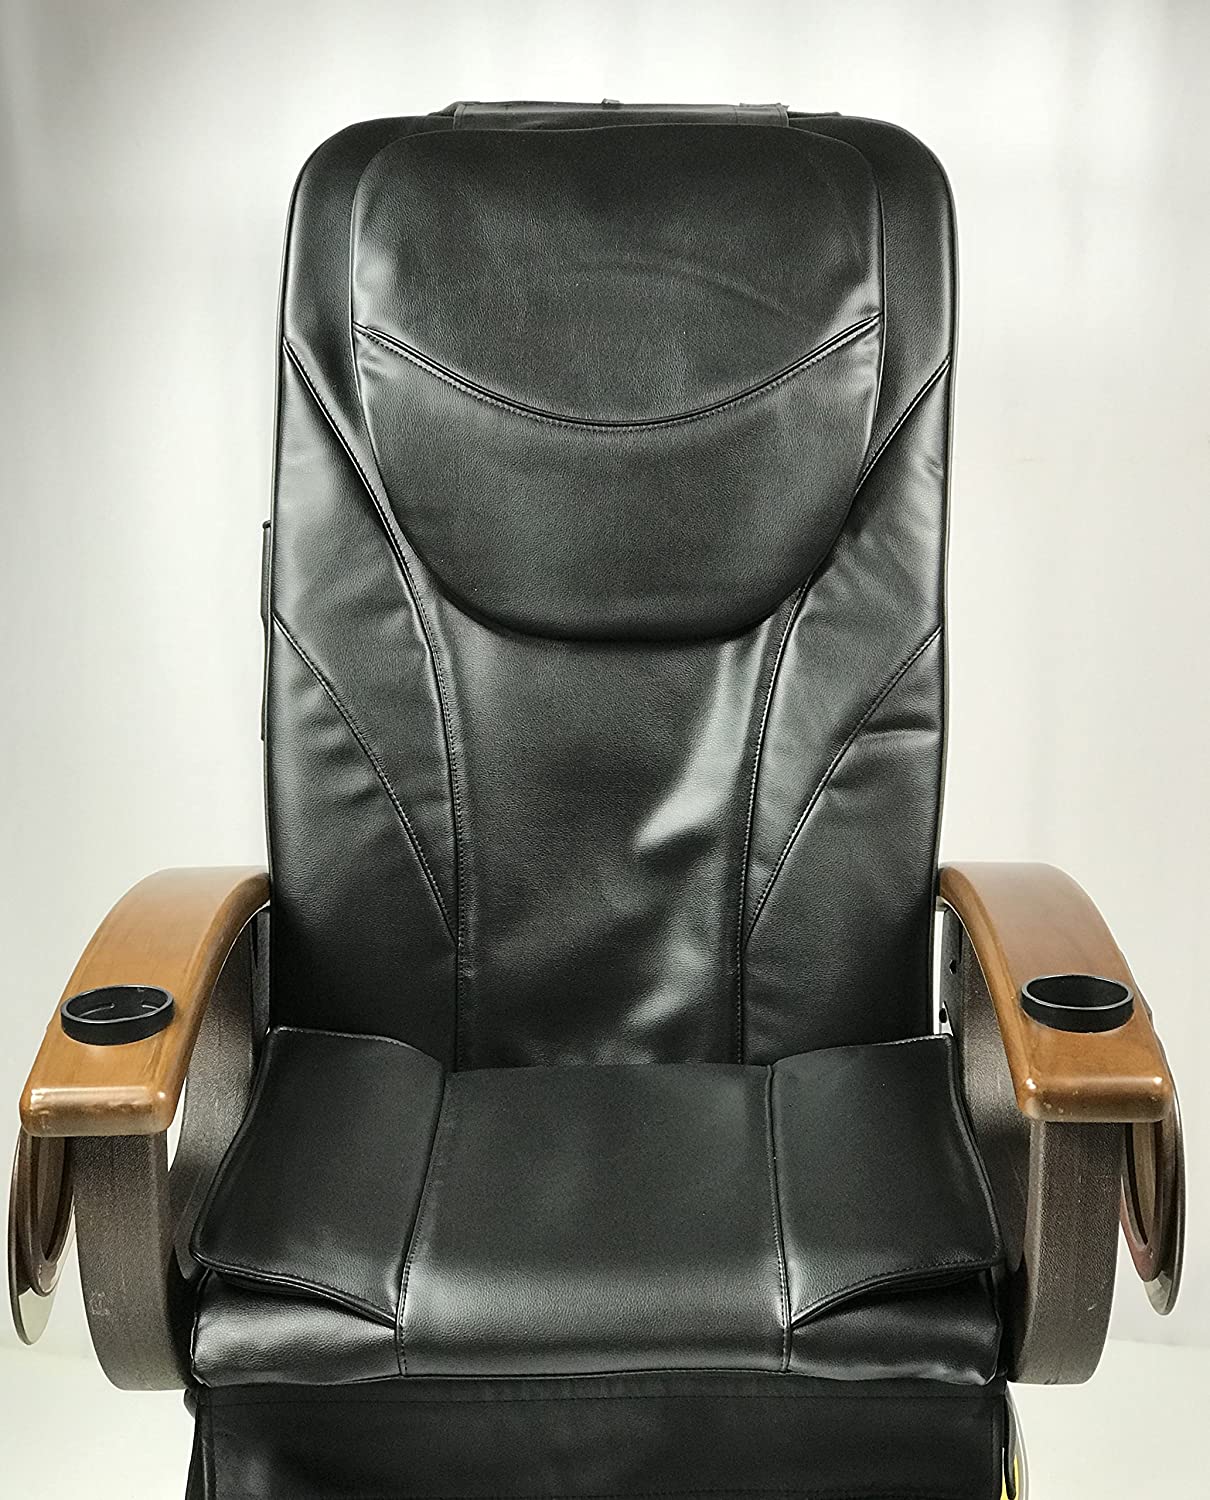 Top 10 Best Cheap Massage Chairs In 2021 Top Best Pro Review